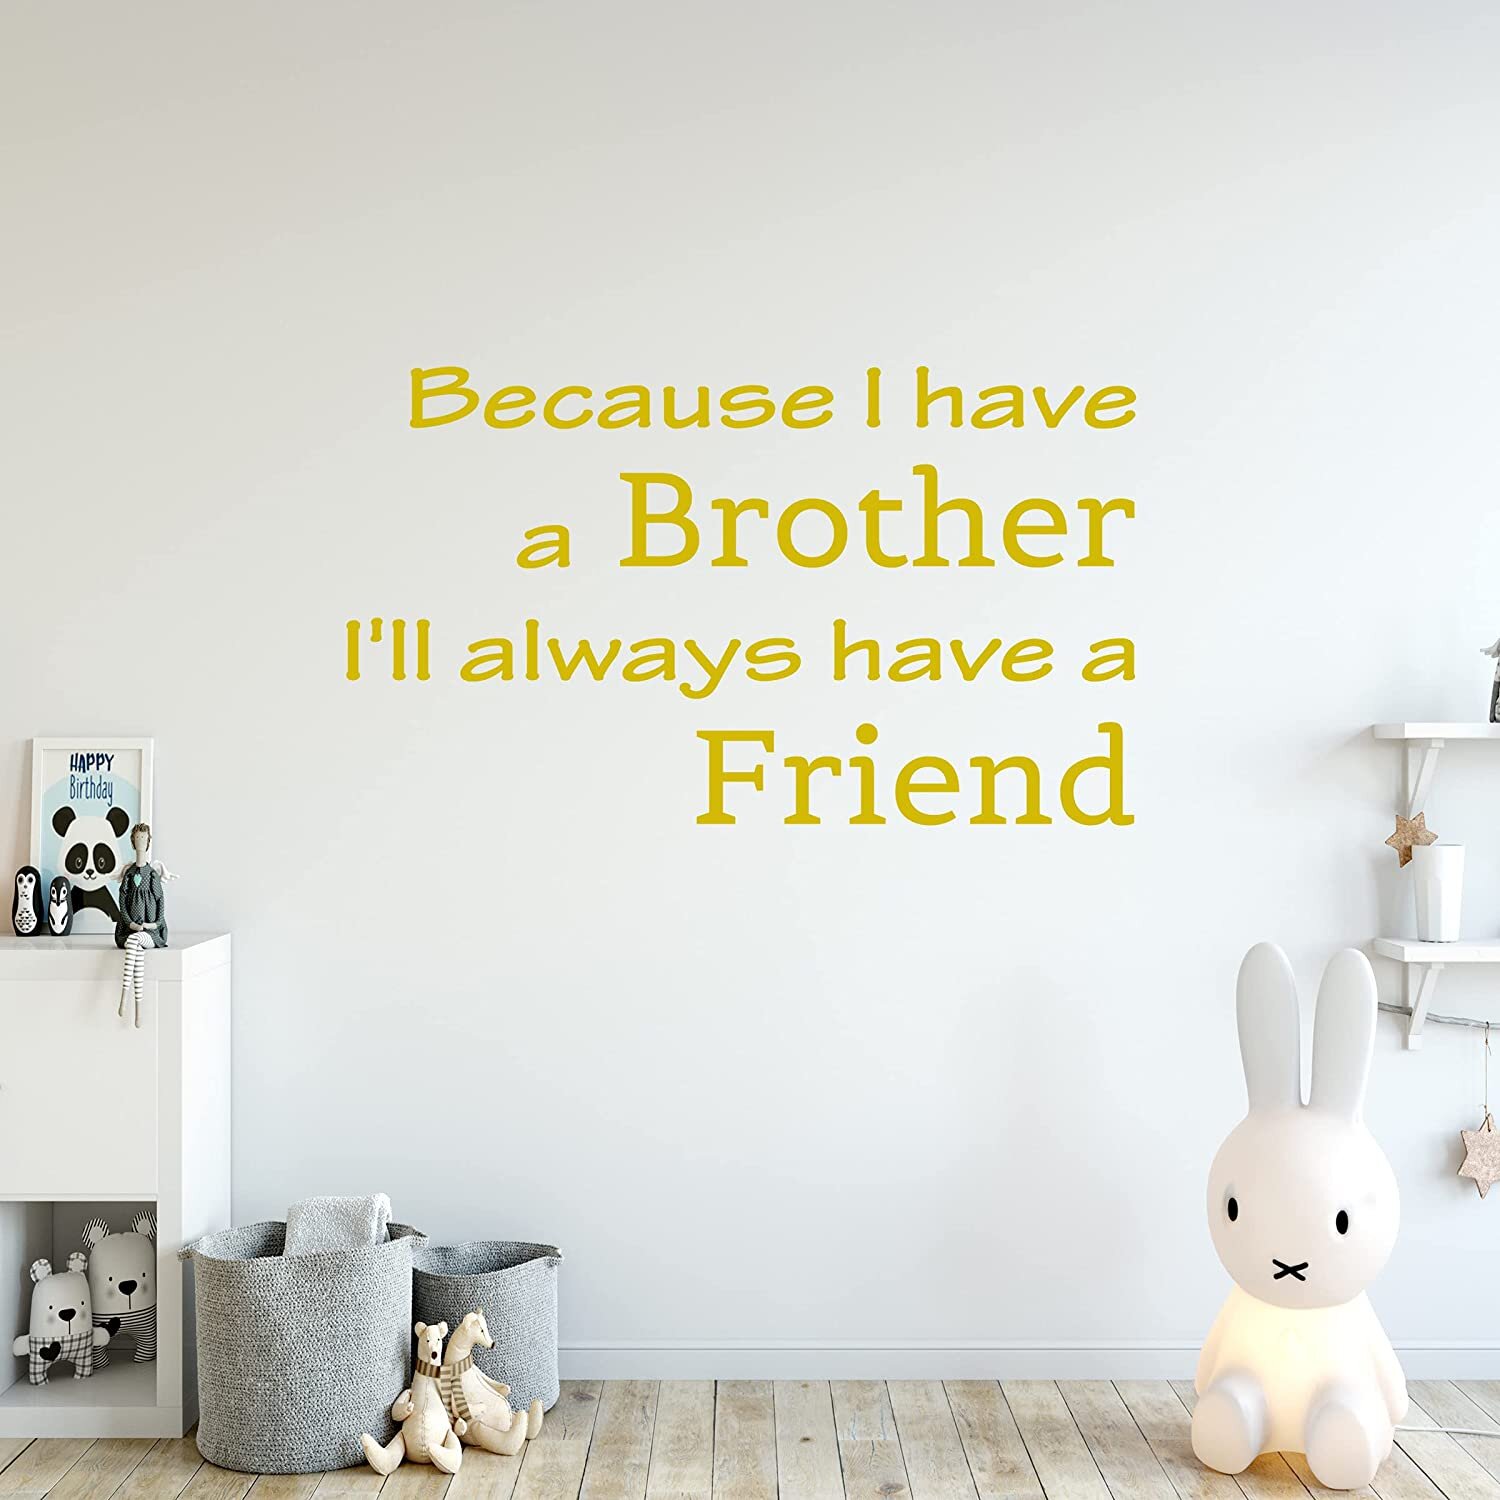 Because i have a sister ill always have a friend Wall art Decal Sticker 